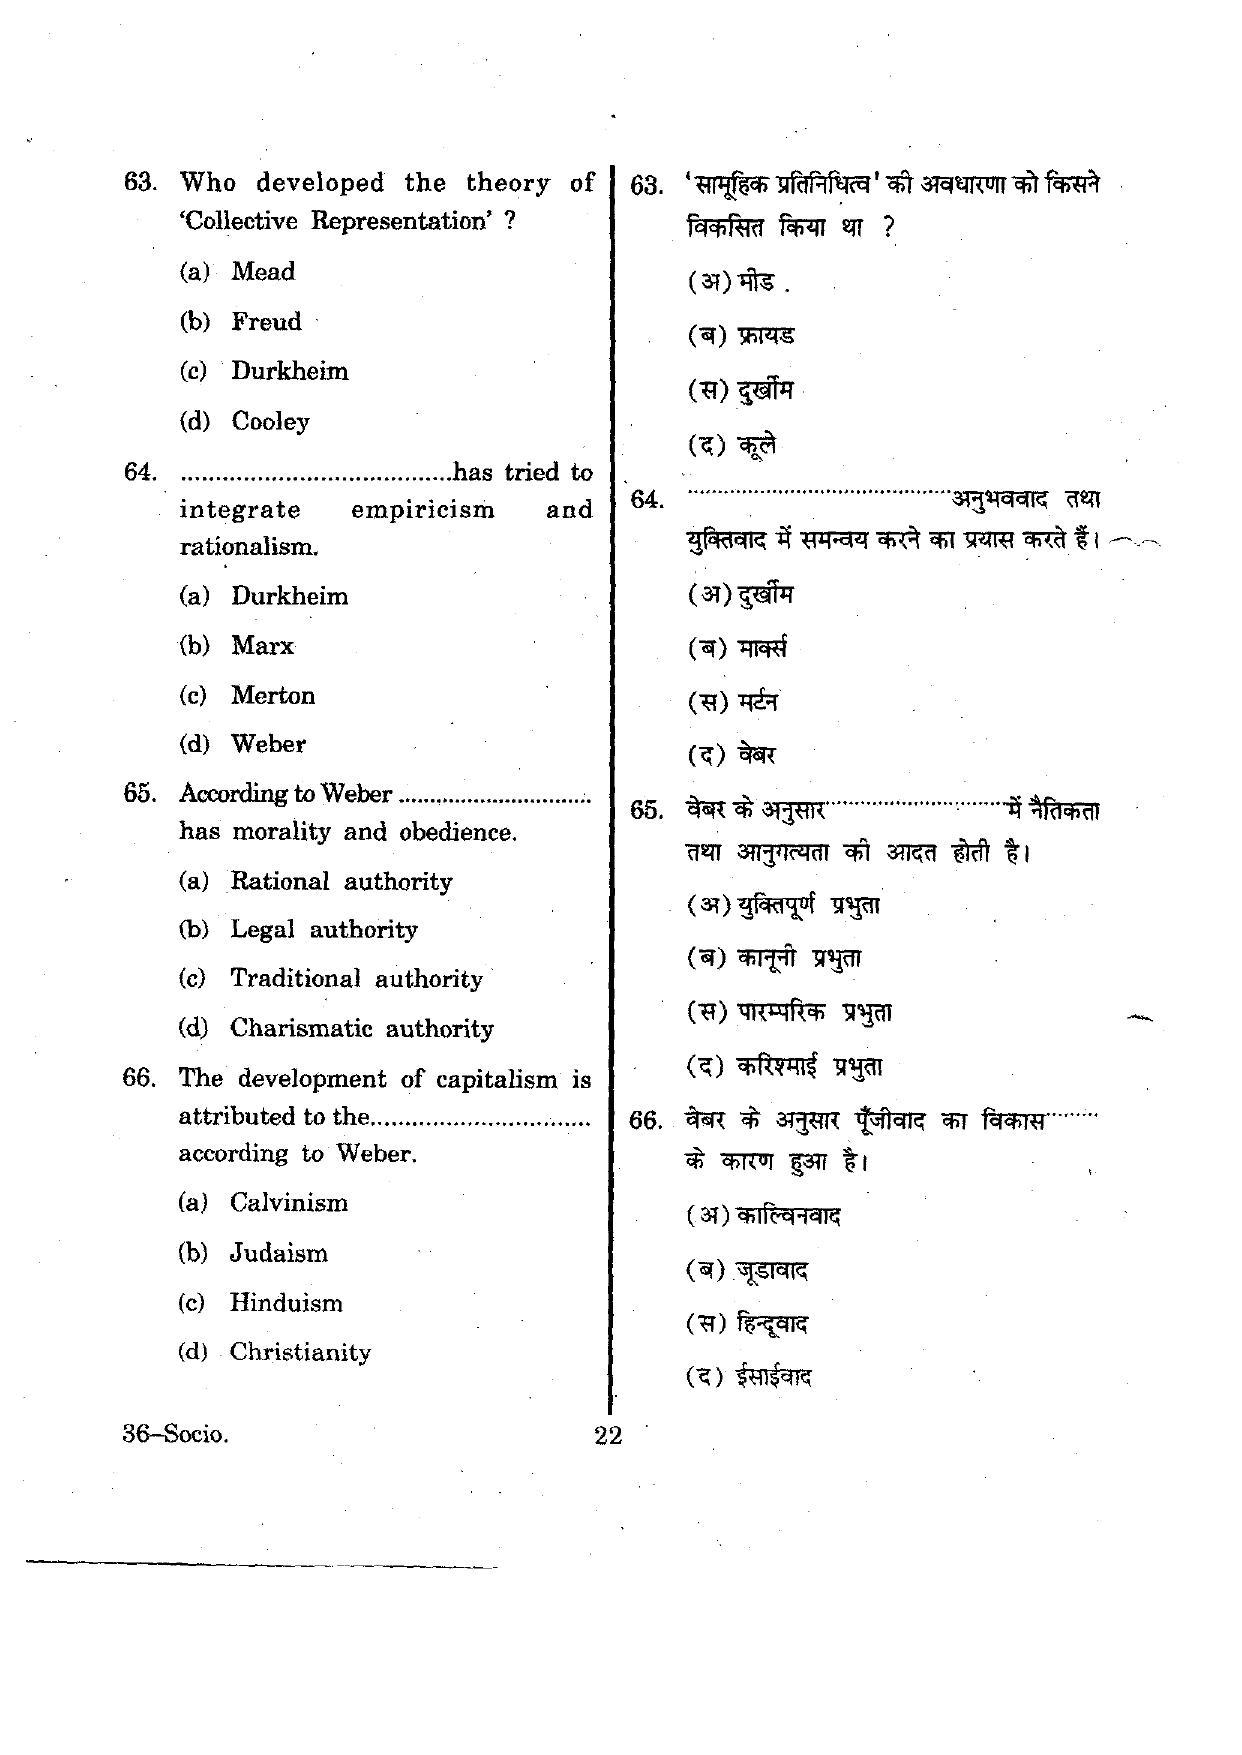 URATPG Sociology 2012 Question Paper - Page 22